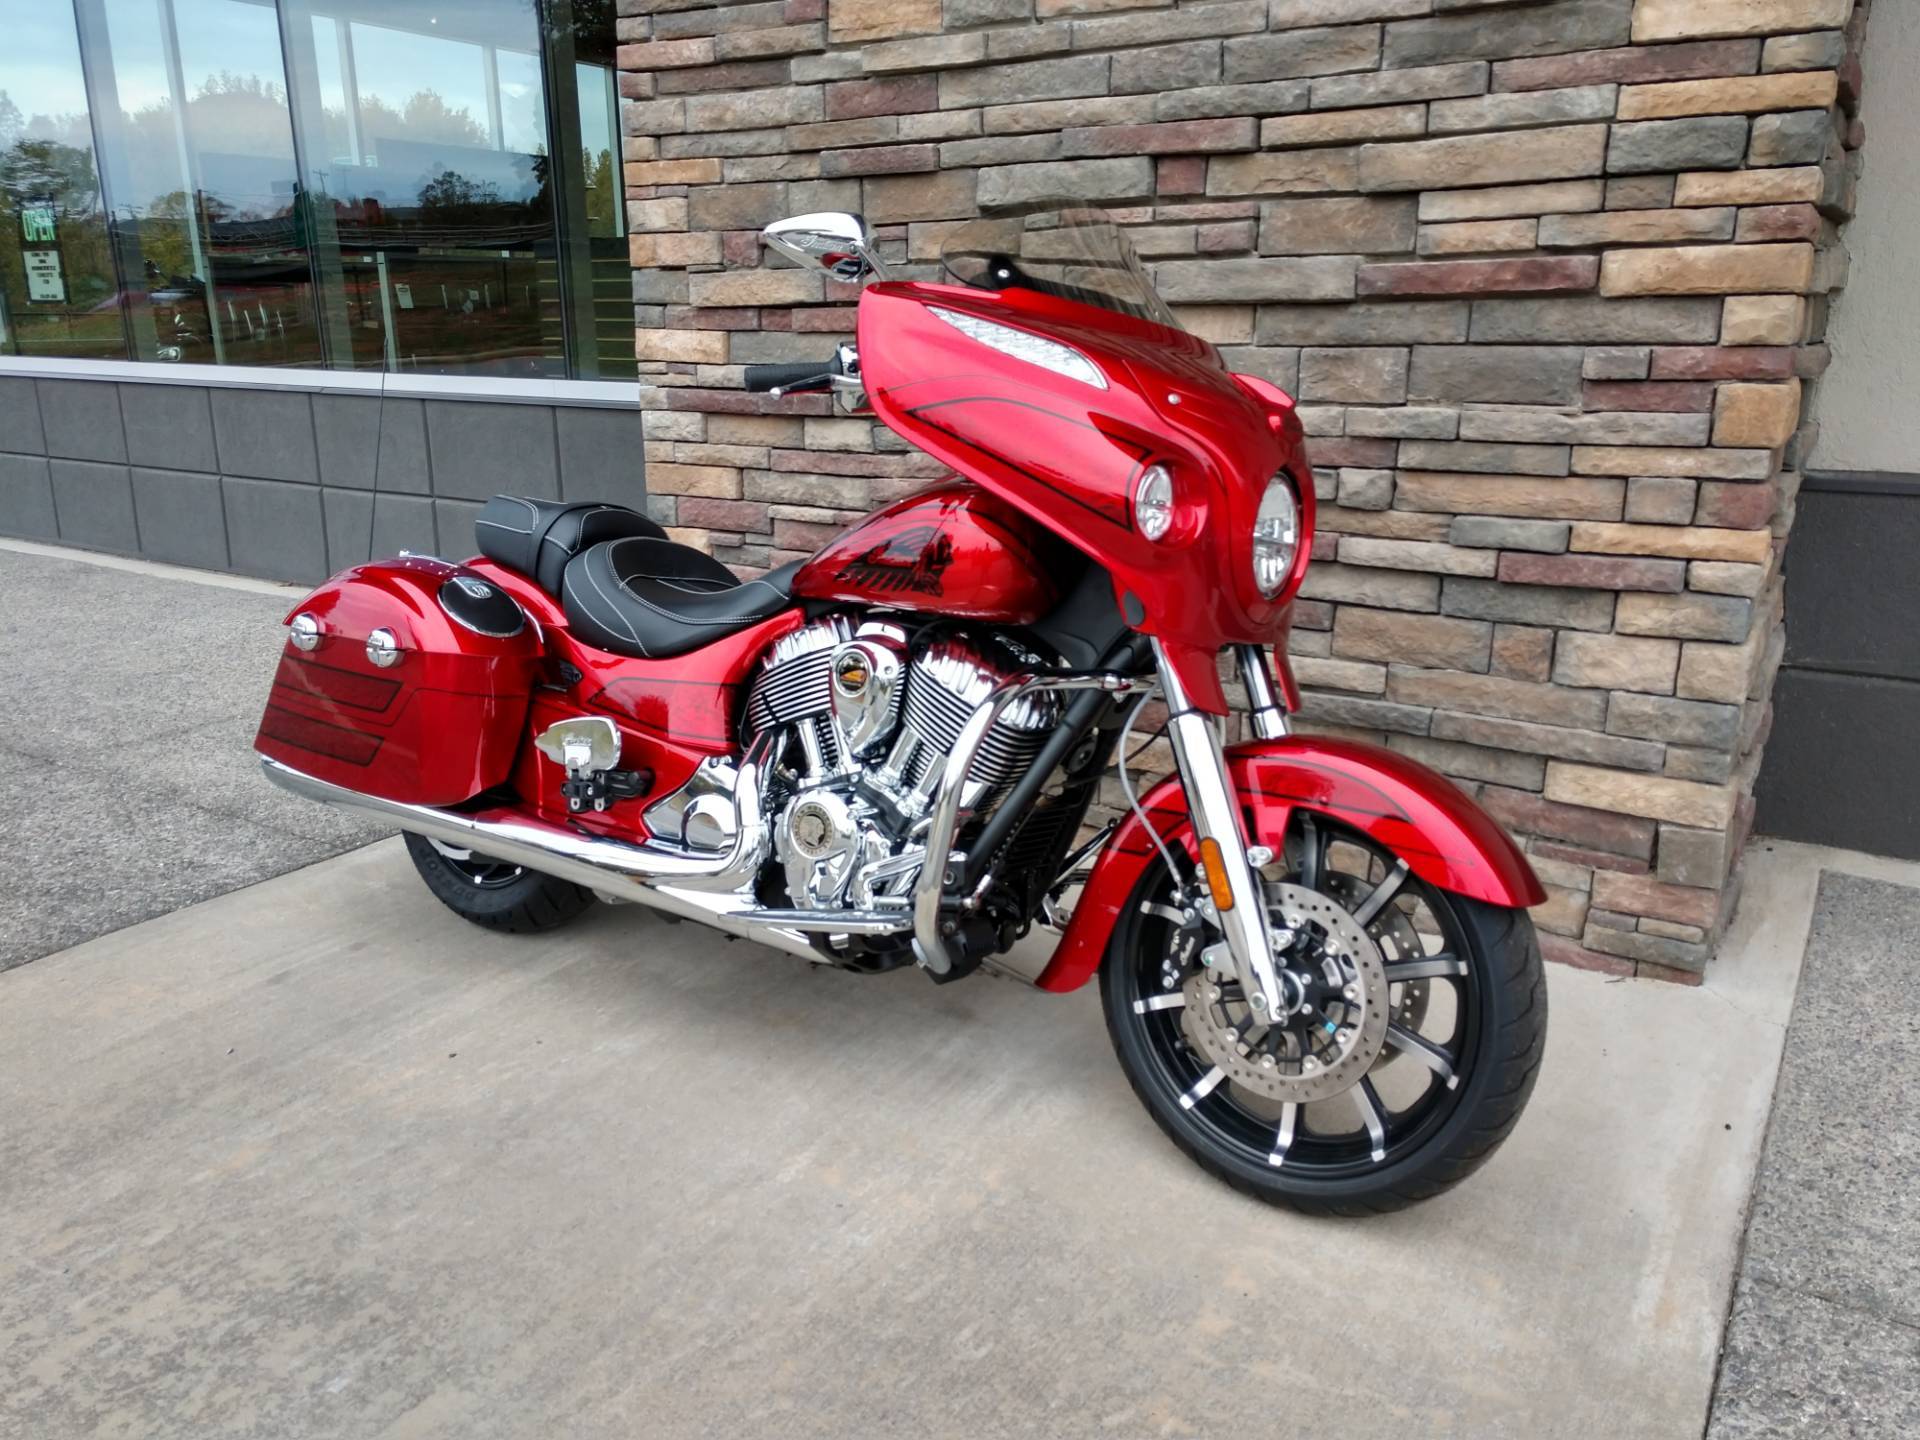 New 2019 Indian Charlotte Signature Edition - Series Three Motorcycles in Lowell, NC | Stock